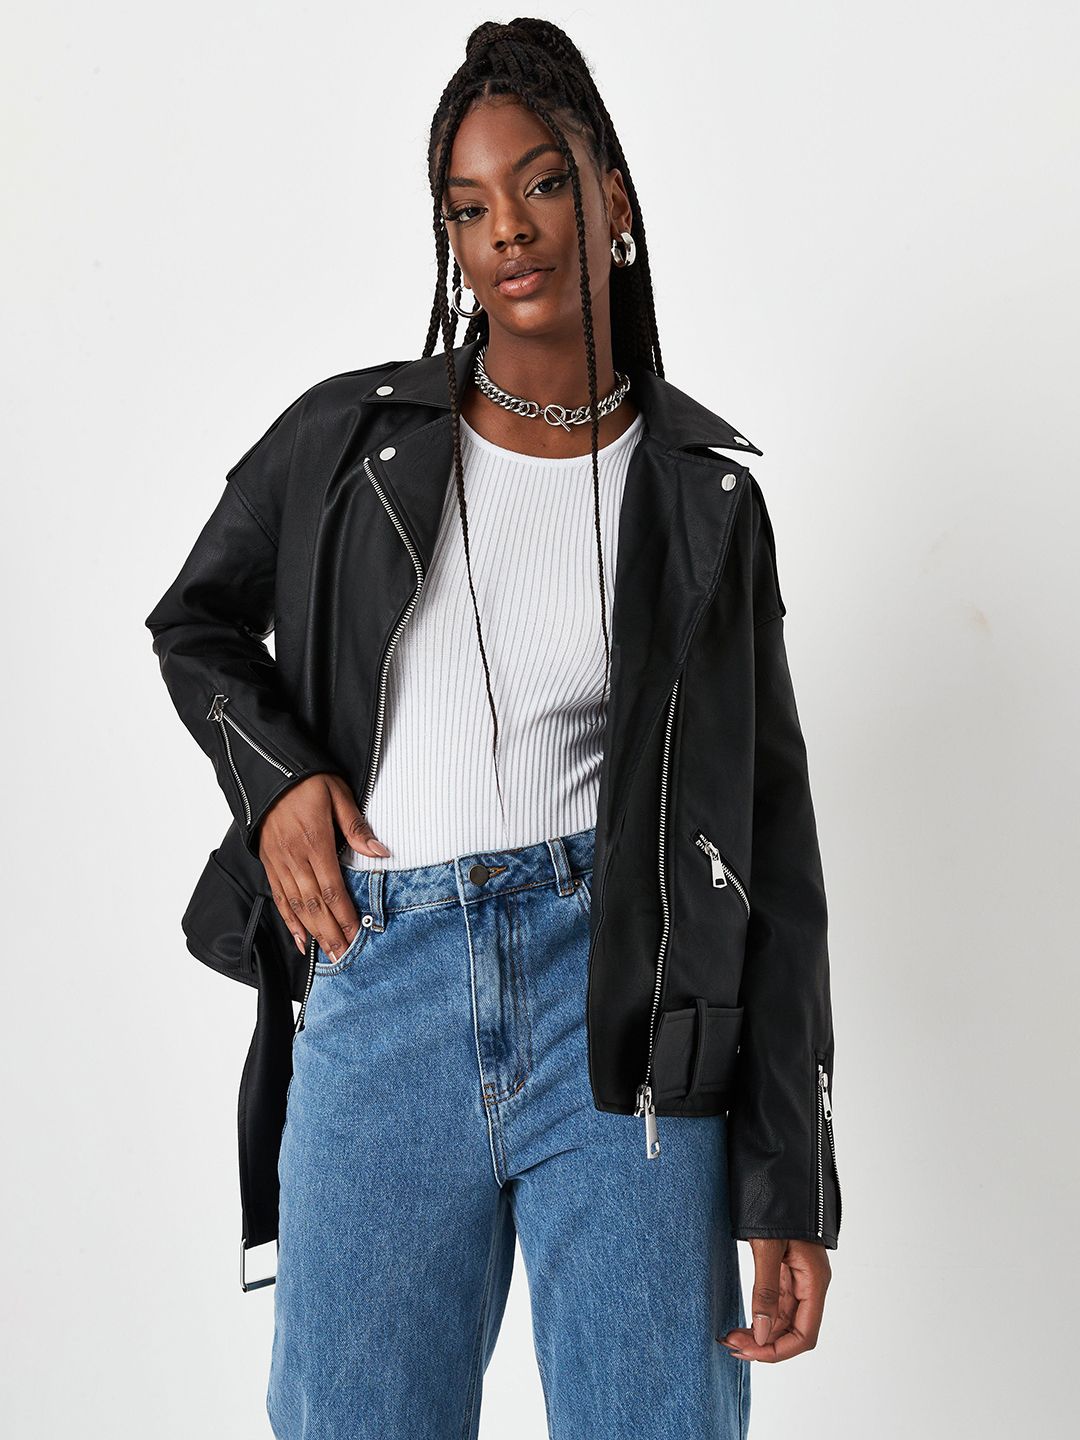 Missguided Women Black Solid Biker Jacket with Belt Price in India